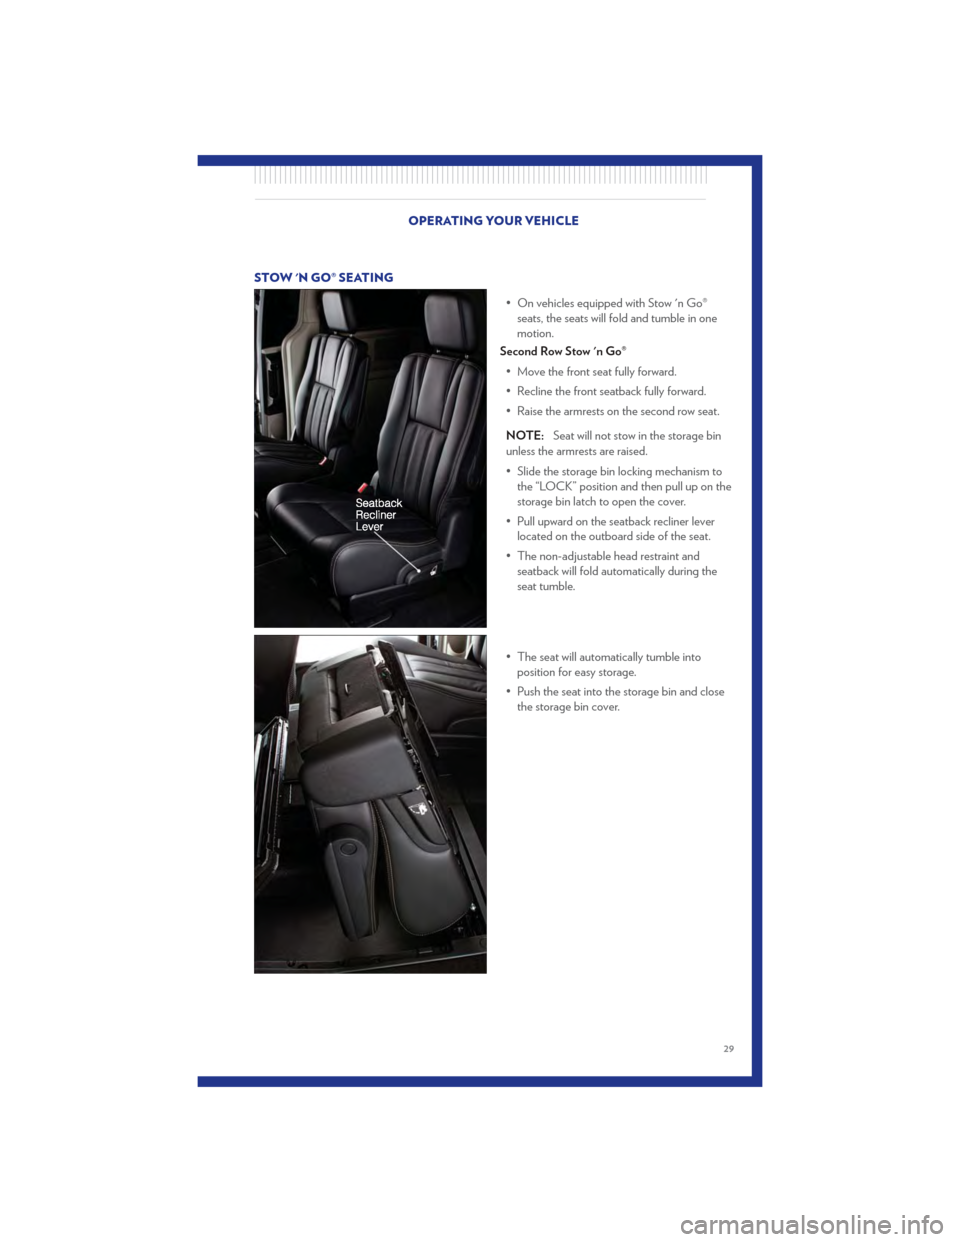 CHRYSLER TOWN AND COUNTRY 2011 5.G Owners Guide STOW N GO® SEATING• On vehicles equipped with Stow n Go®seats, the seats will fold and tumble in one
motion.
Second Row Stow n Go®
• Move the front seat fully forward.
• Recline the front 